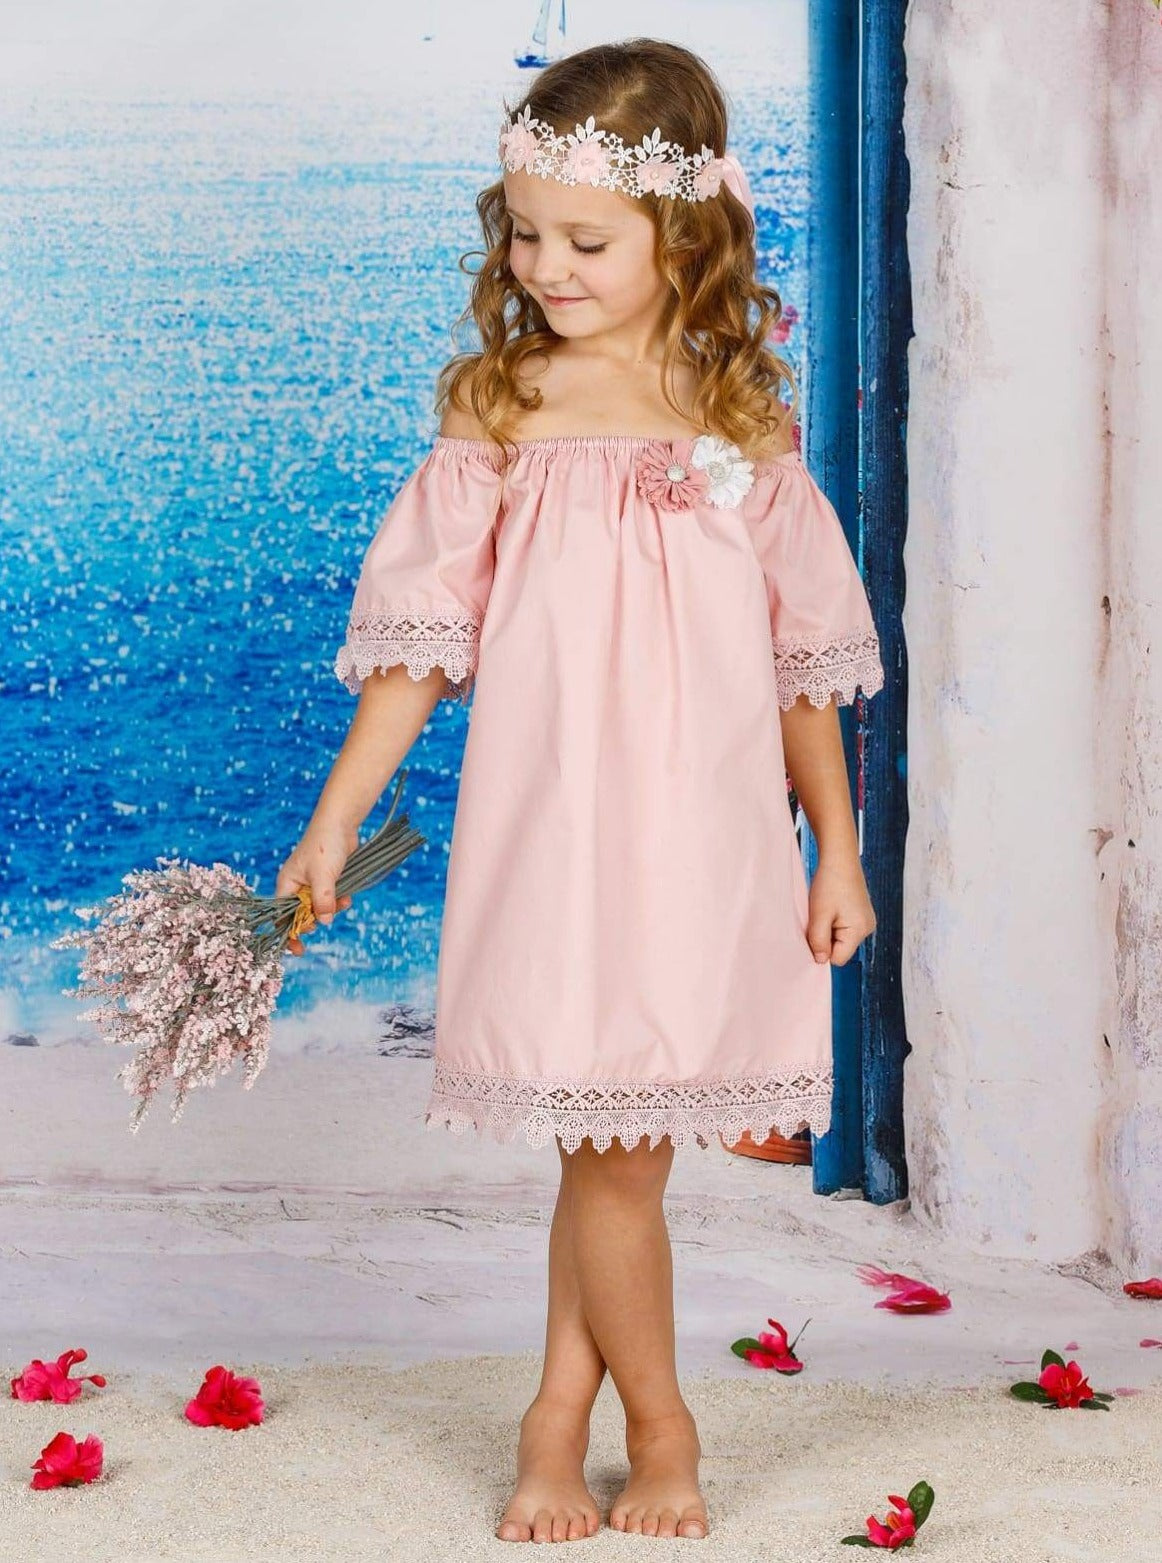 Girls Boho Elastic Off the Shoulder Lace Trimmed Dress with Flower Clip - Girls Spring Casual Dress